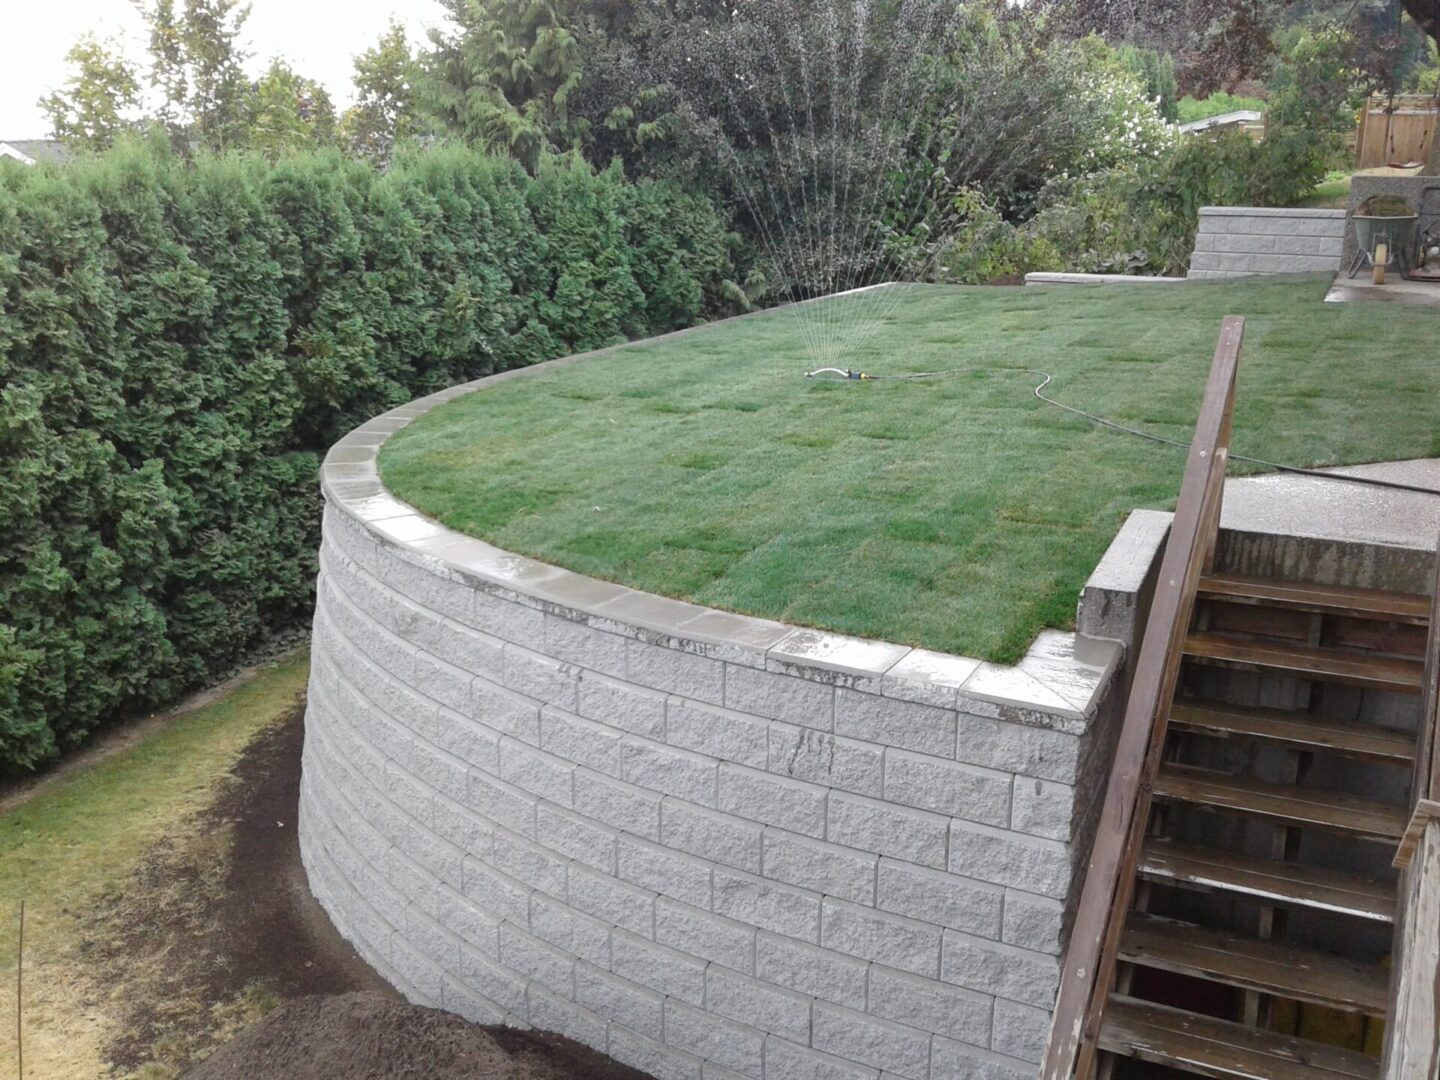 A curved retaining wall made of gray blocks with upper grass levels being watered by a sprinkler, surrounded by lush green bushes.